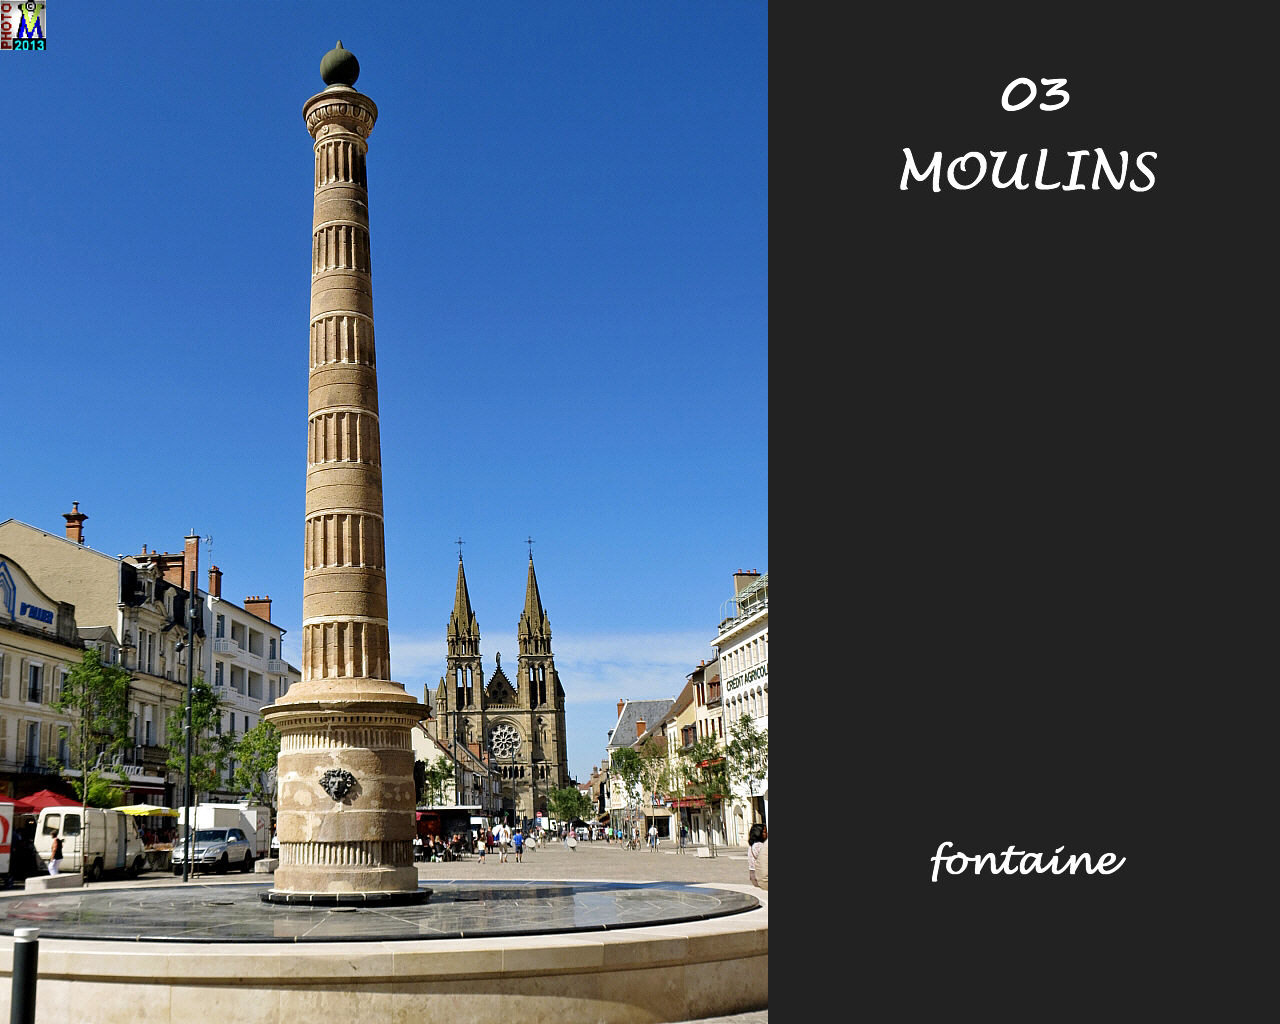 03MOULINS_fontaine_102.jpg